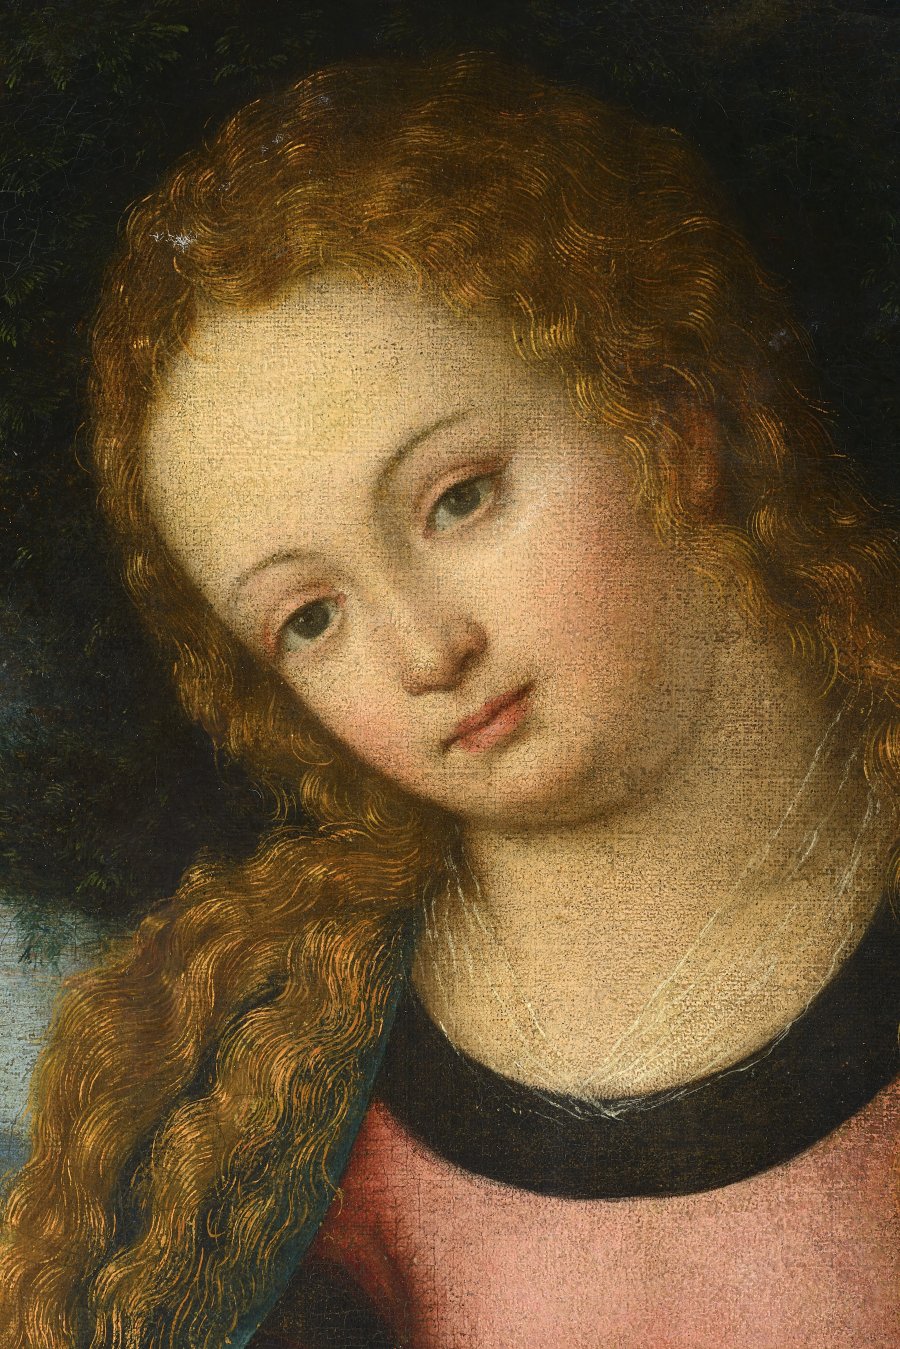 MADONNA WITH CHILD AND GRAPES